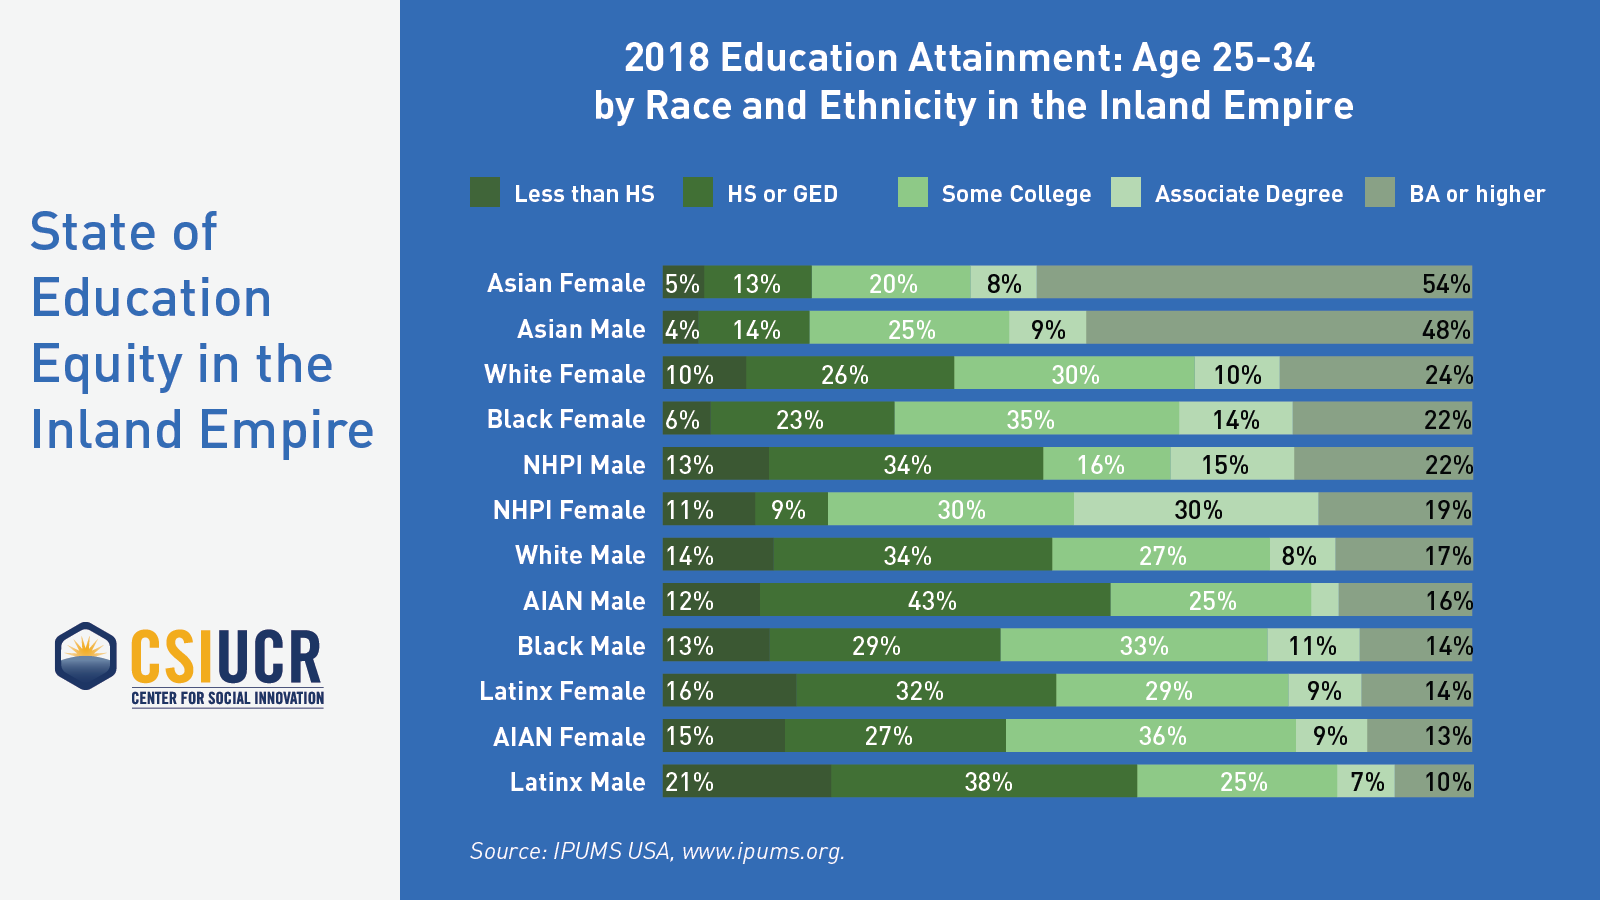 2018 Education Attainment: Age 25-34 by Race and Ethnicity in the IE